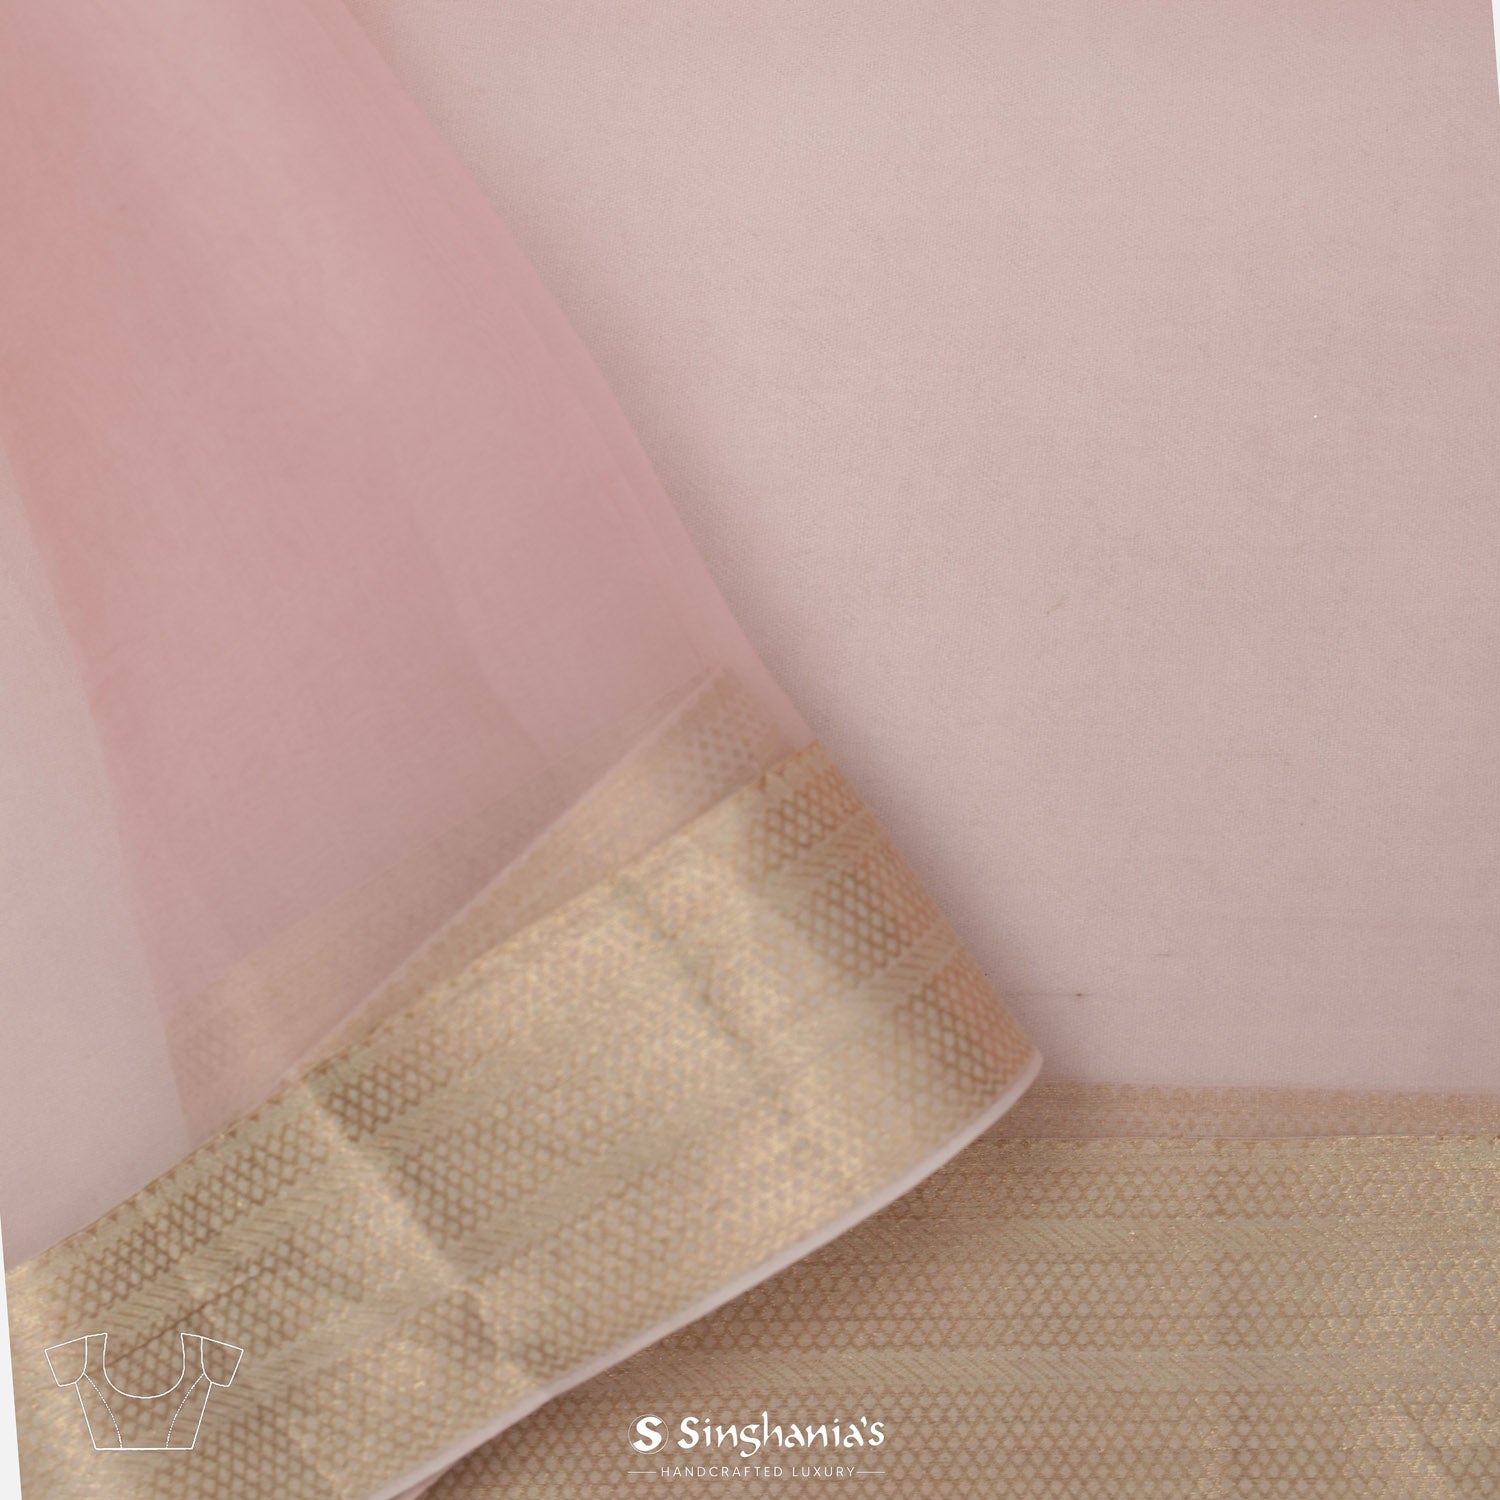 Oyster Pink Printed Organza Saree With Floral Pattern